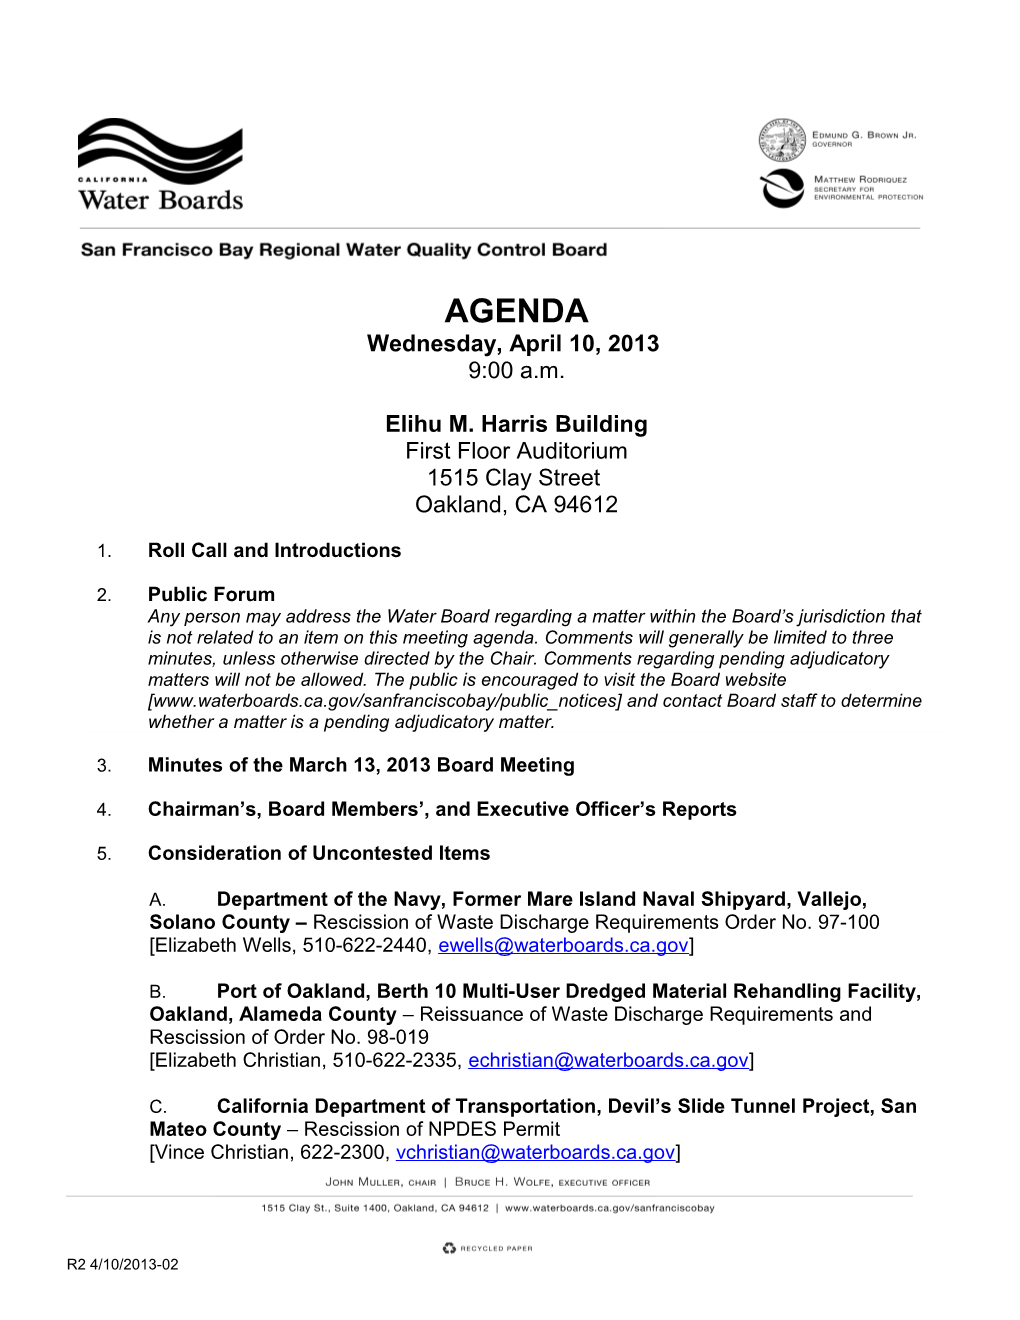 Water Board Meeting Agenda Page 1 of 1